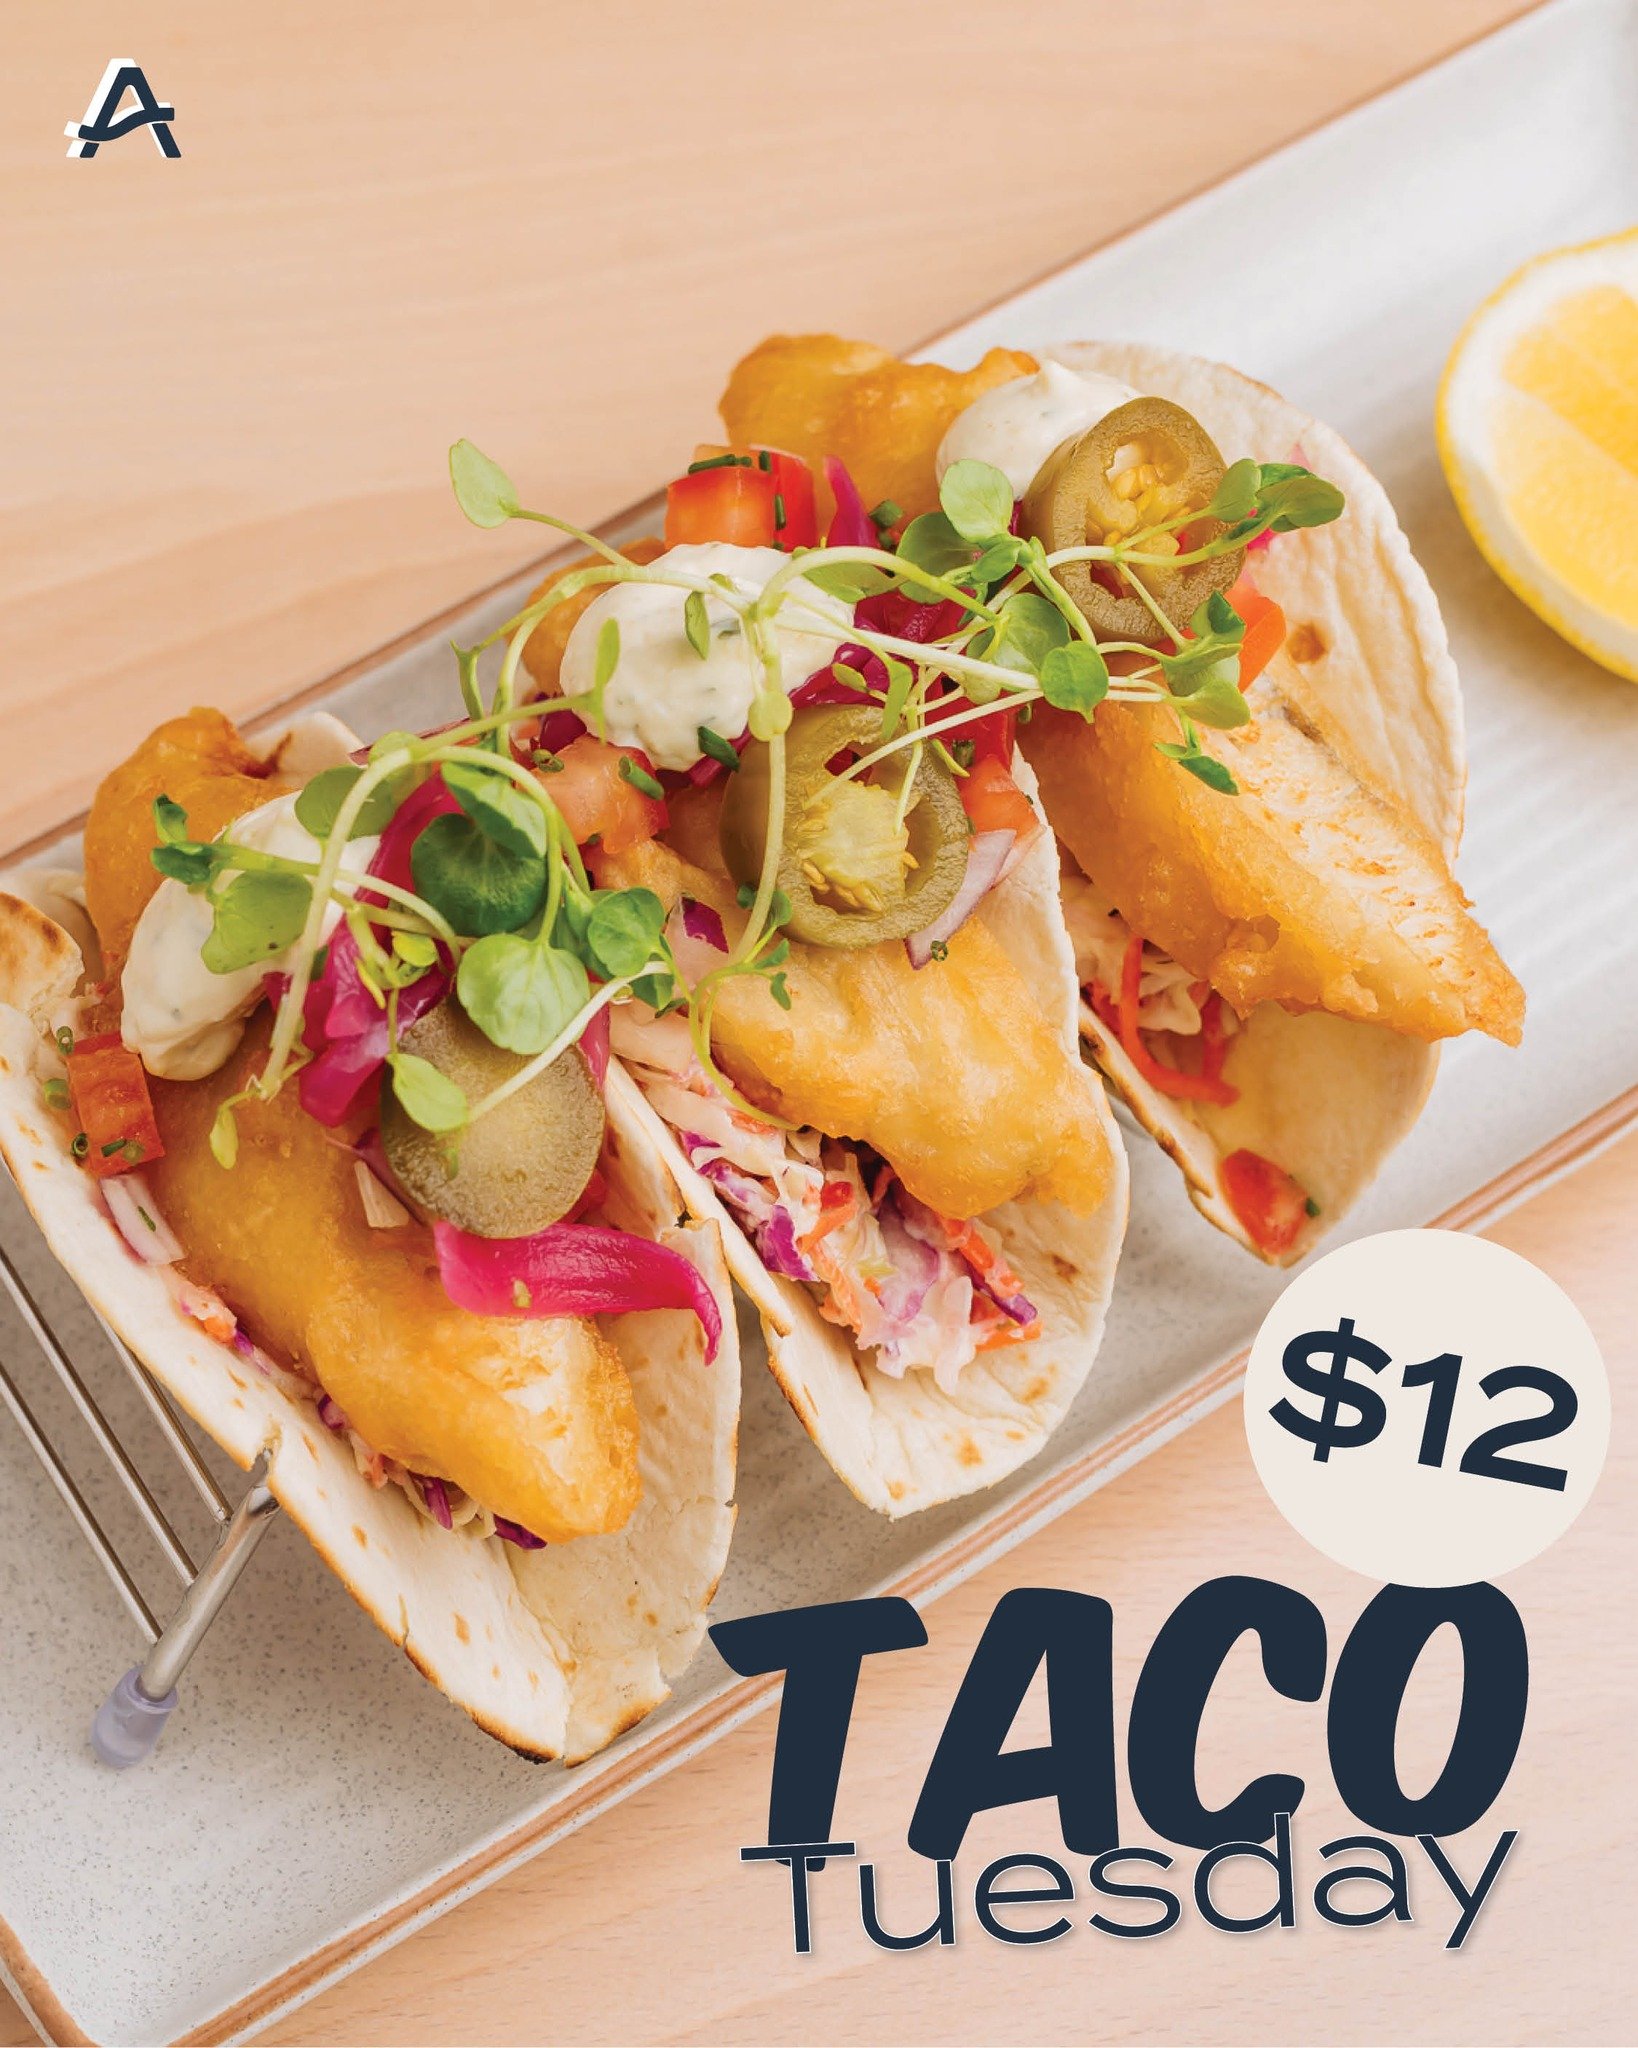 The only bad Taco is the one you didn&rsquo;t eat 🌮

Head into Ashmore Tavern for Taco Tuesday, where you can enjoy three pork, chicken or fish tacos for only $12!

Available every Tuesday from 11:30am to 8:30pm.

Come on in and spice up your evenin